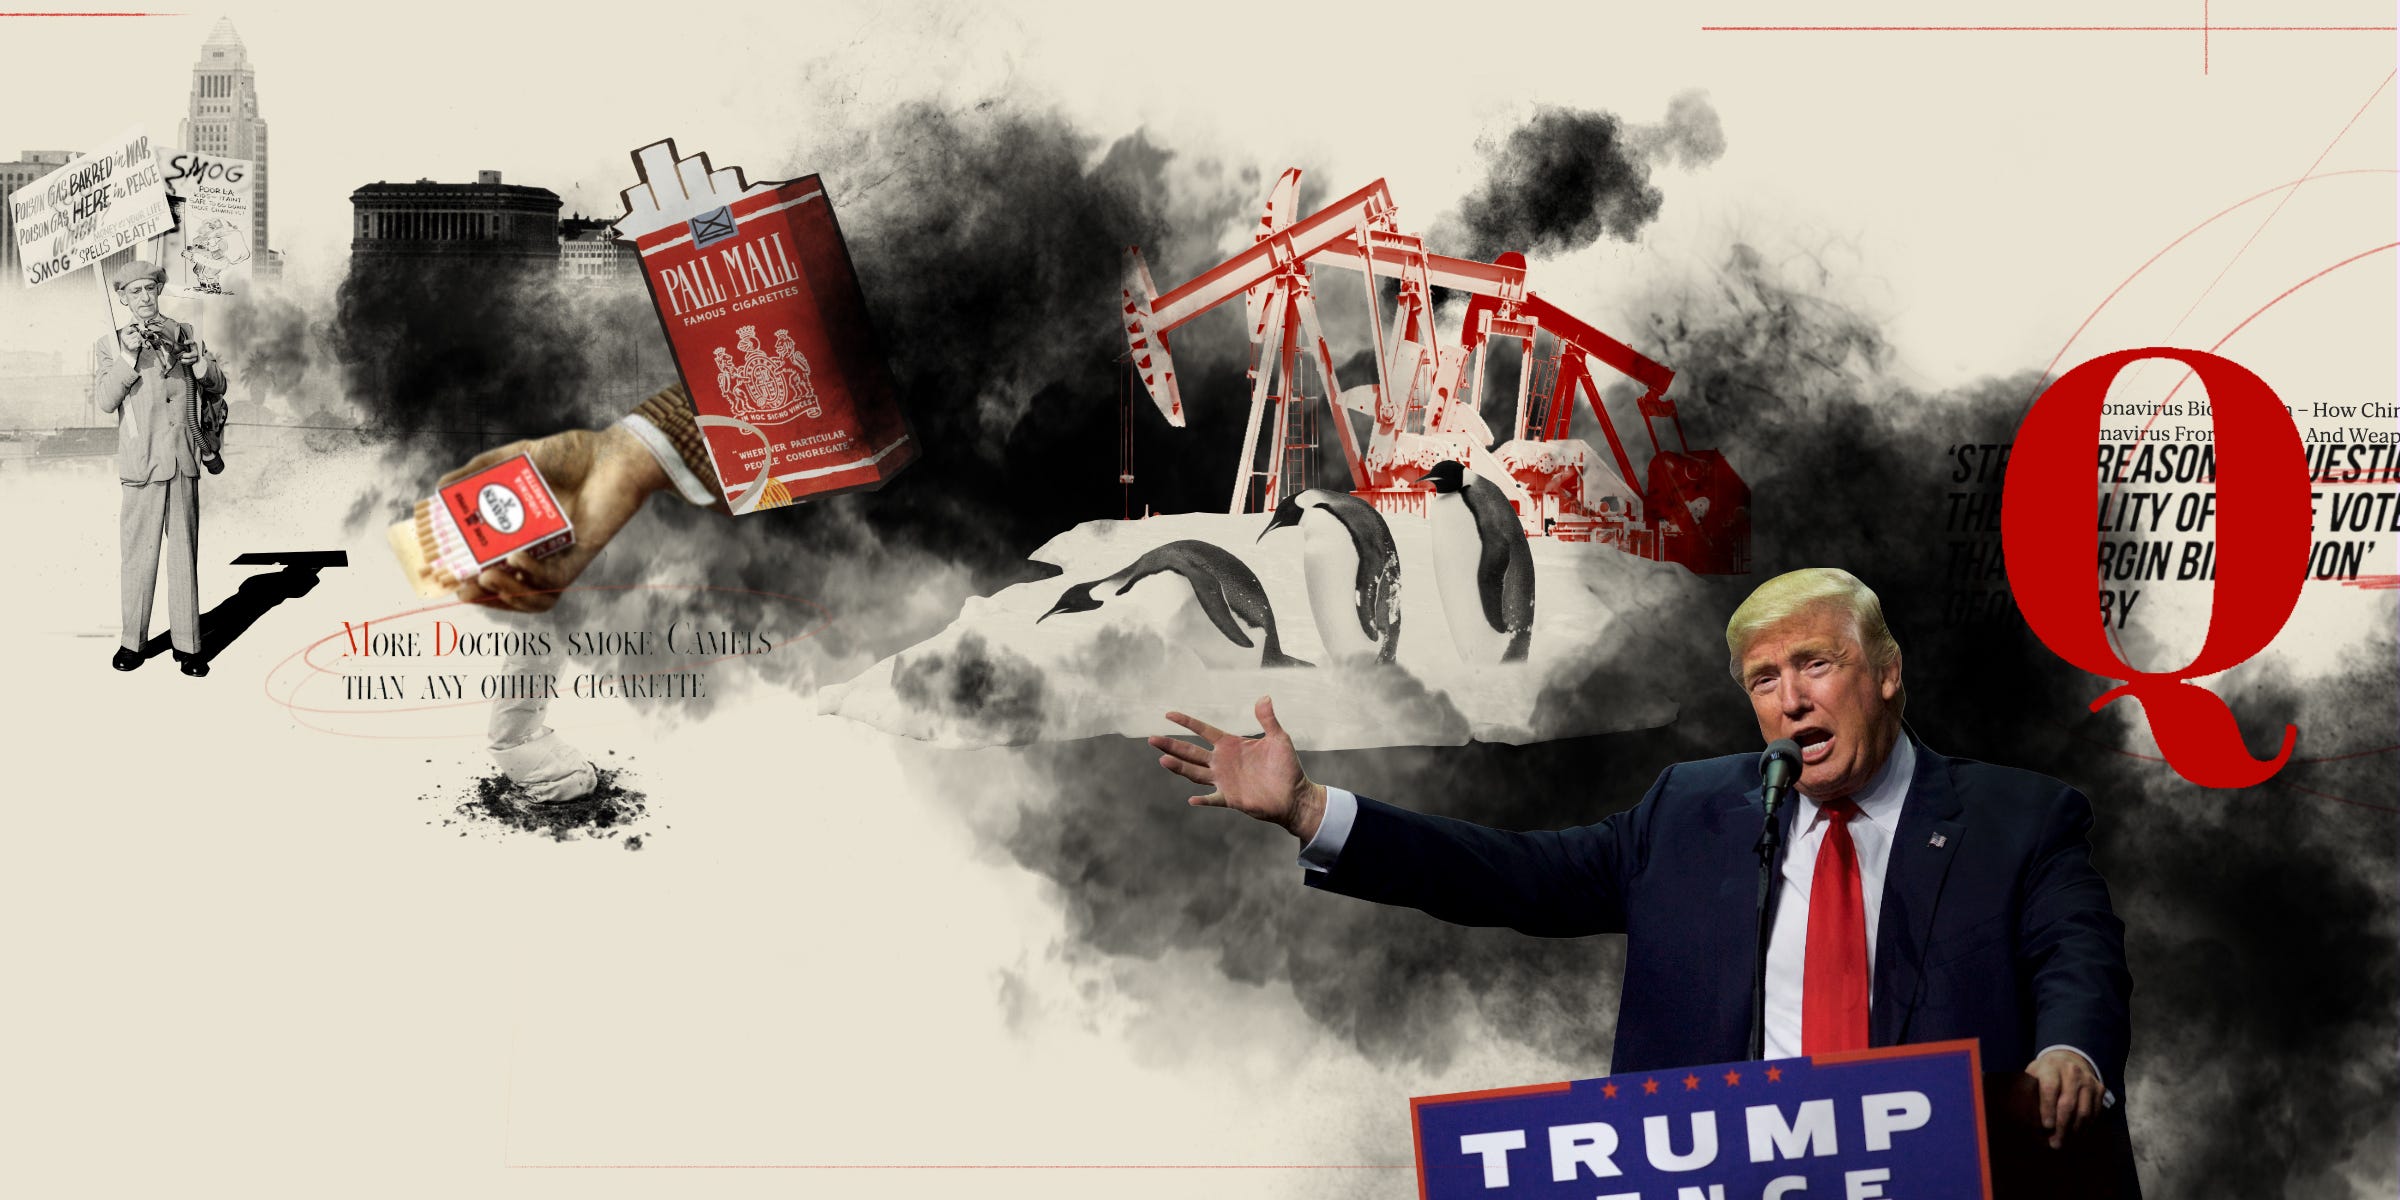 A large smog cloud with a protestor, tobacco/cigarette imagery, an oil pump with penguins for climate change, and Donald Trump with Q imagery and news headlines on a beige background.